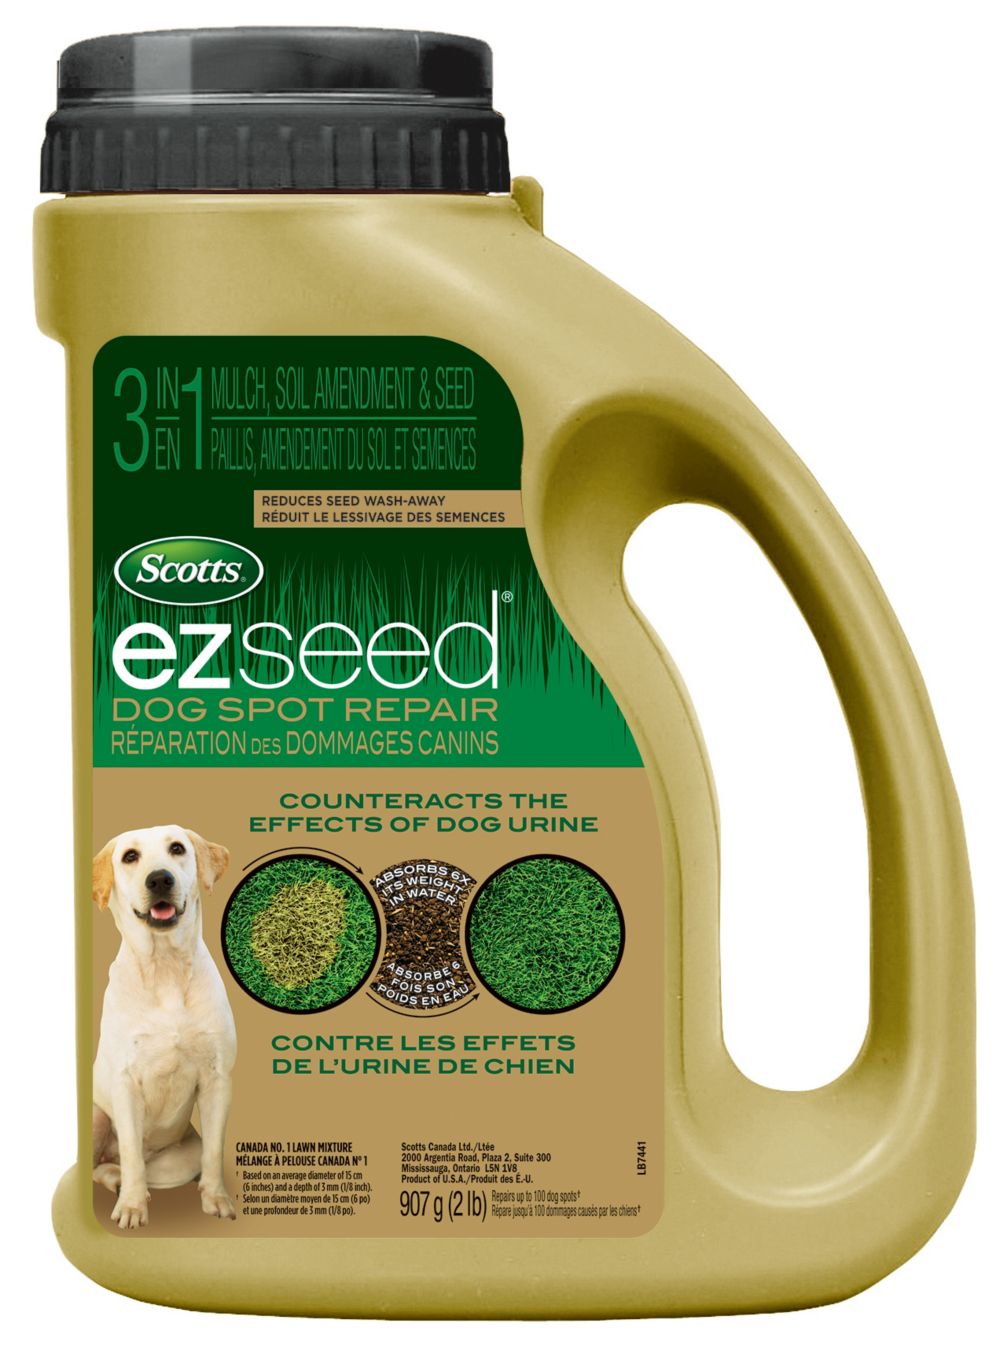 Is lawn seed safe for dogs